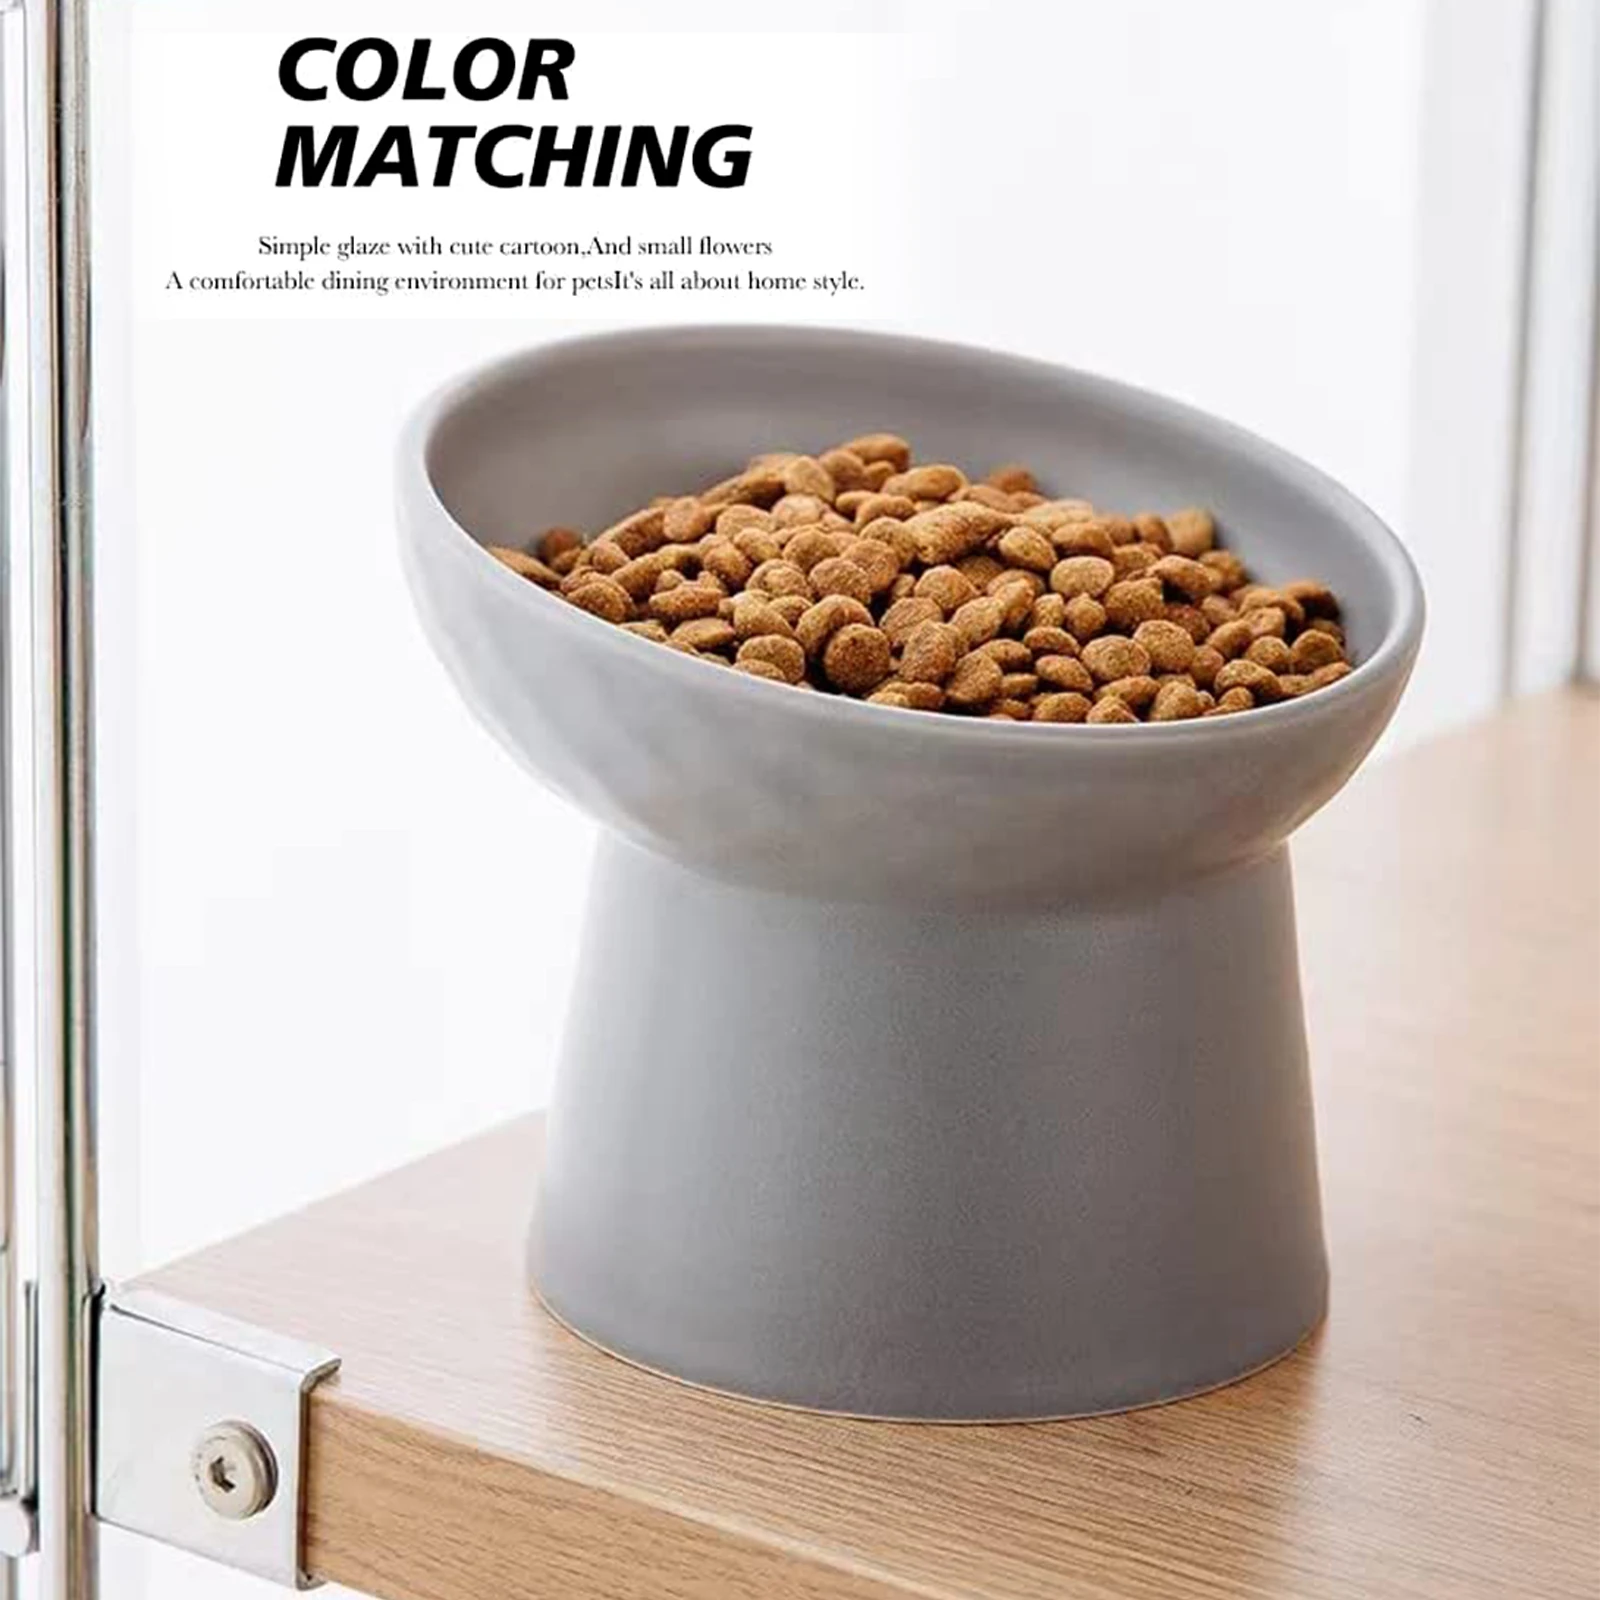 https://ae01.alicdn.com/kf/S14c6d523aef649f09b11c2e94616e76cC/Cat-Nordic-Style-Food-Water-Bowl-Pet-Animal-Ceramic-Eating-Dishes-High-Foot-Candy-Color-Puppy.jpg